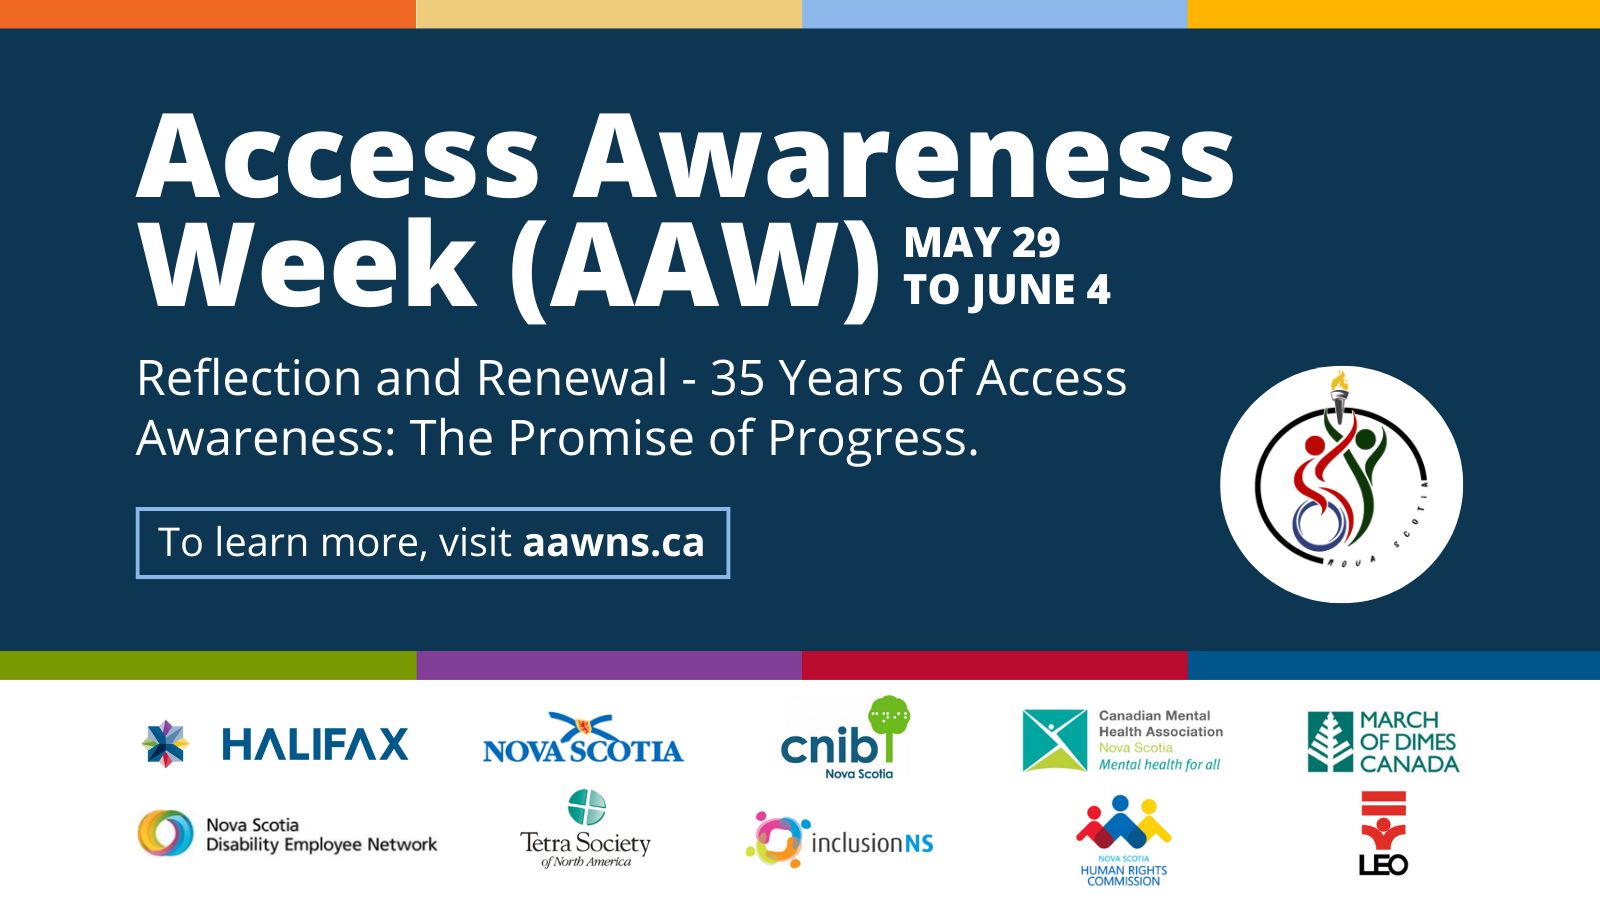 Poster style image with text: Access Awareness Week (AAW) May 29 - June 4 Reflection and Renewal - 35 Years of Access Awareness: The Promise of Progress. Supporting organization logos along the bottom.